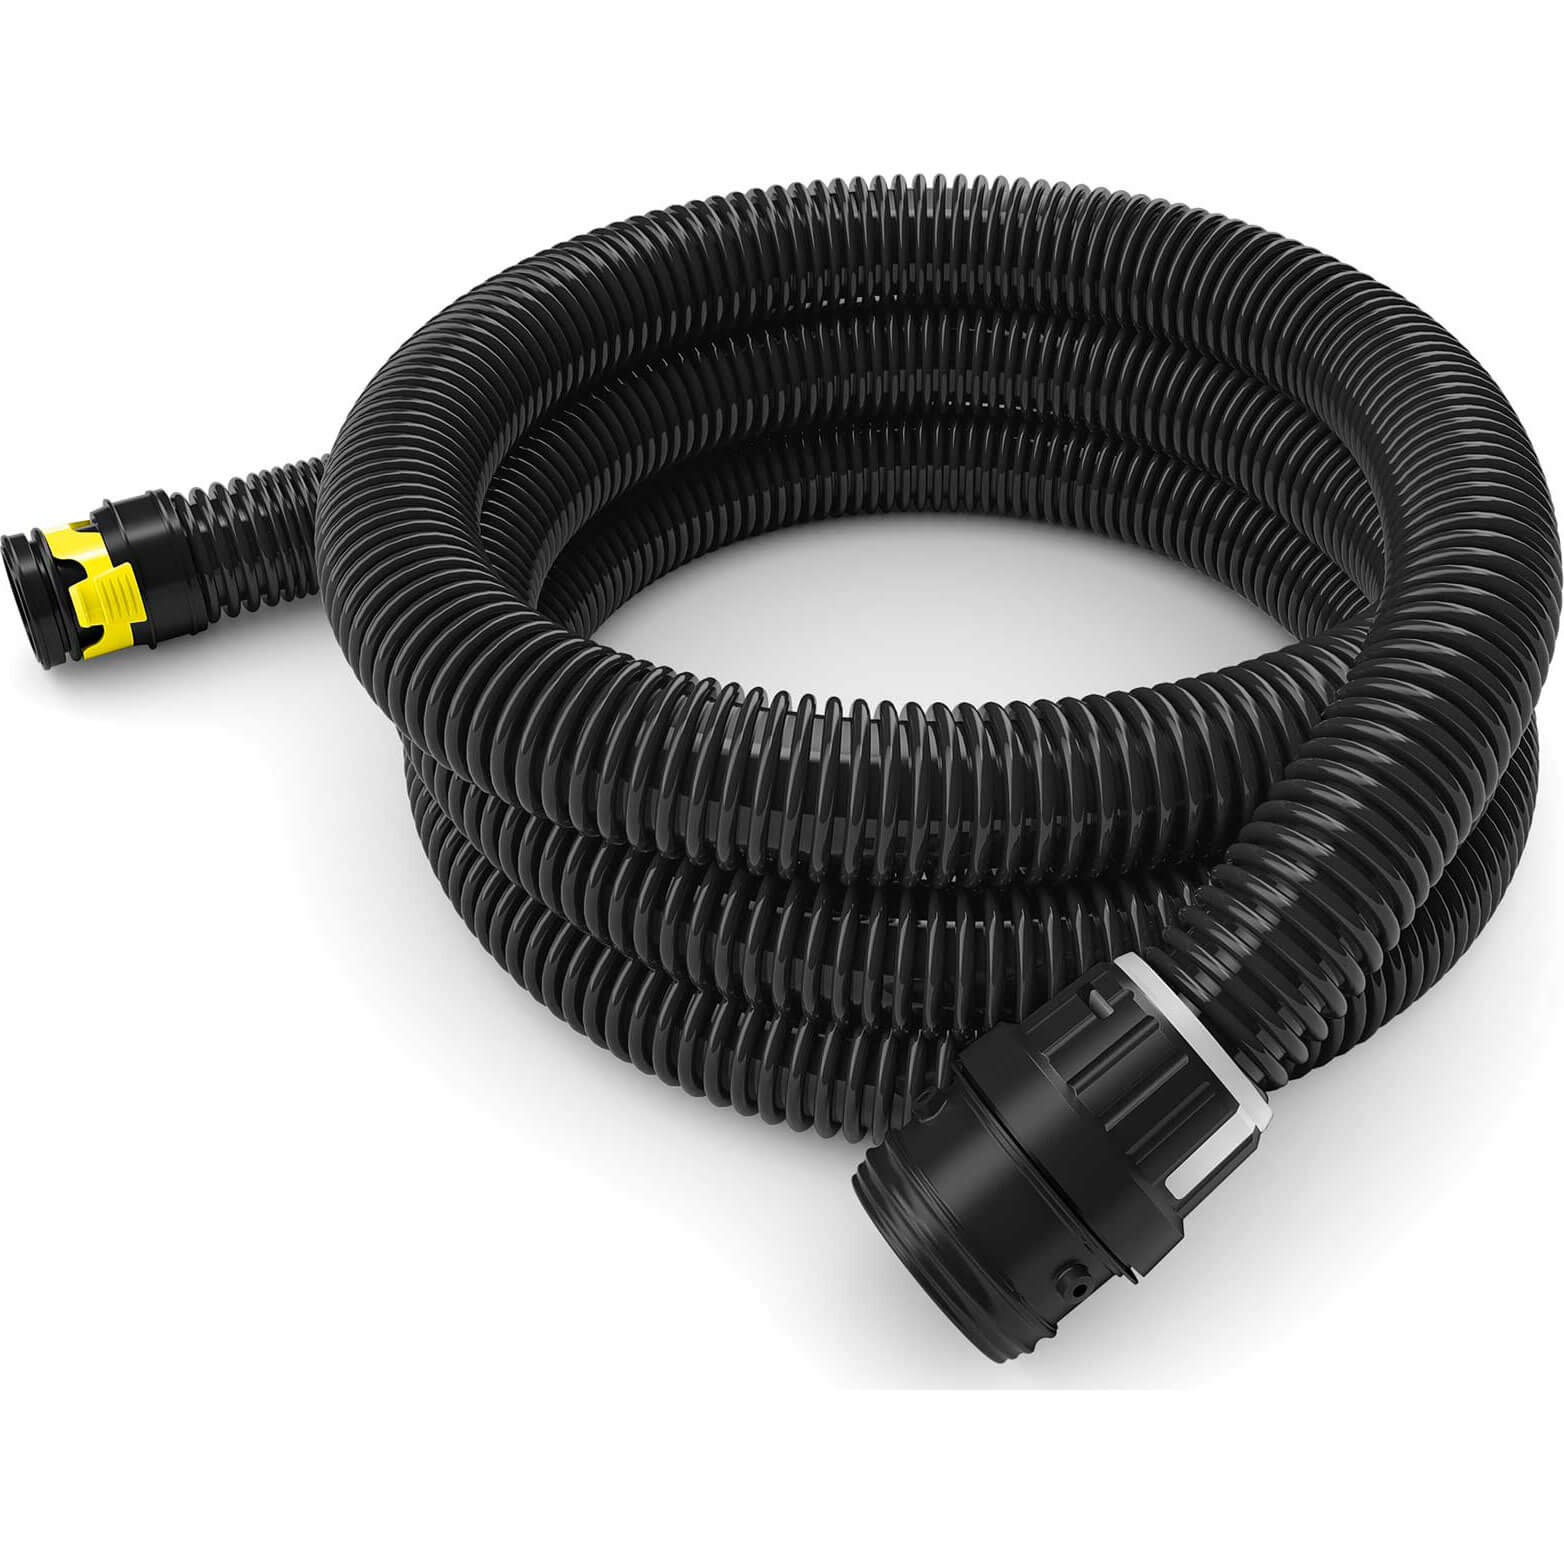 Photo of Karcher Anti Static Suction Hose 4m For Nt 30/1 And 40/1 Vacuum Cleaners